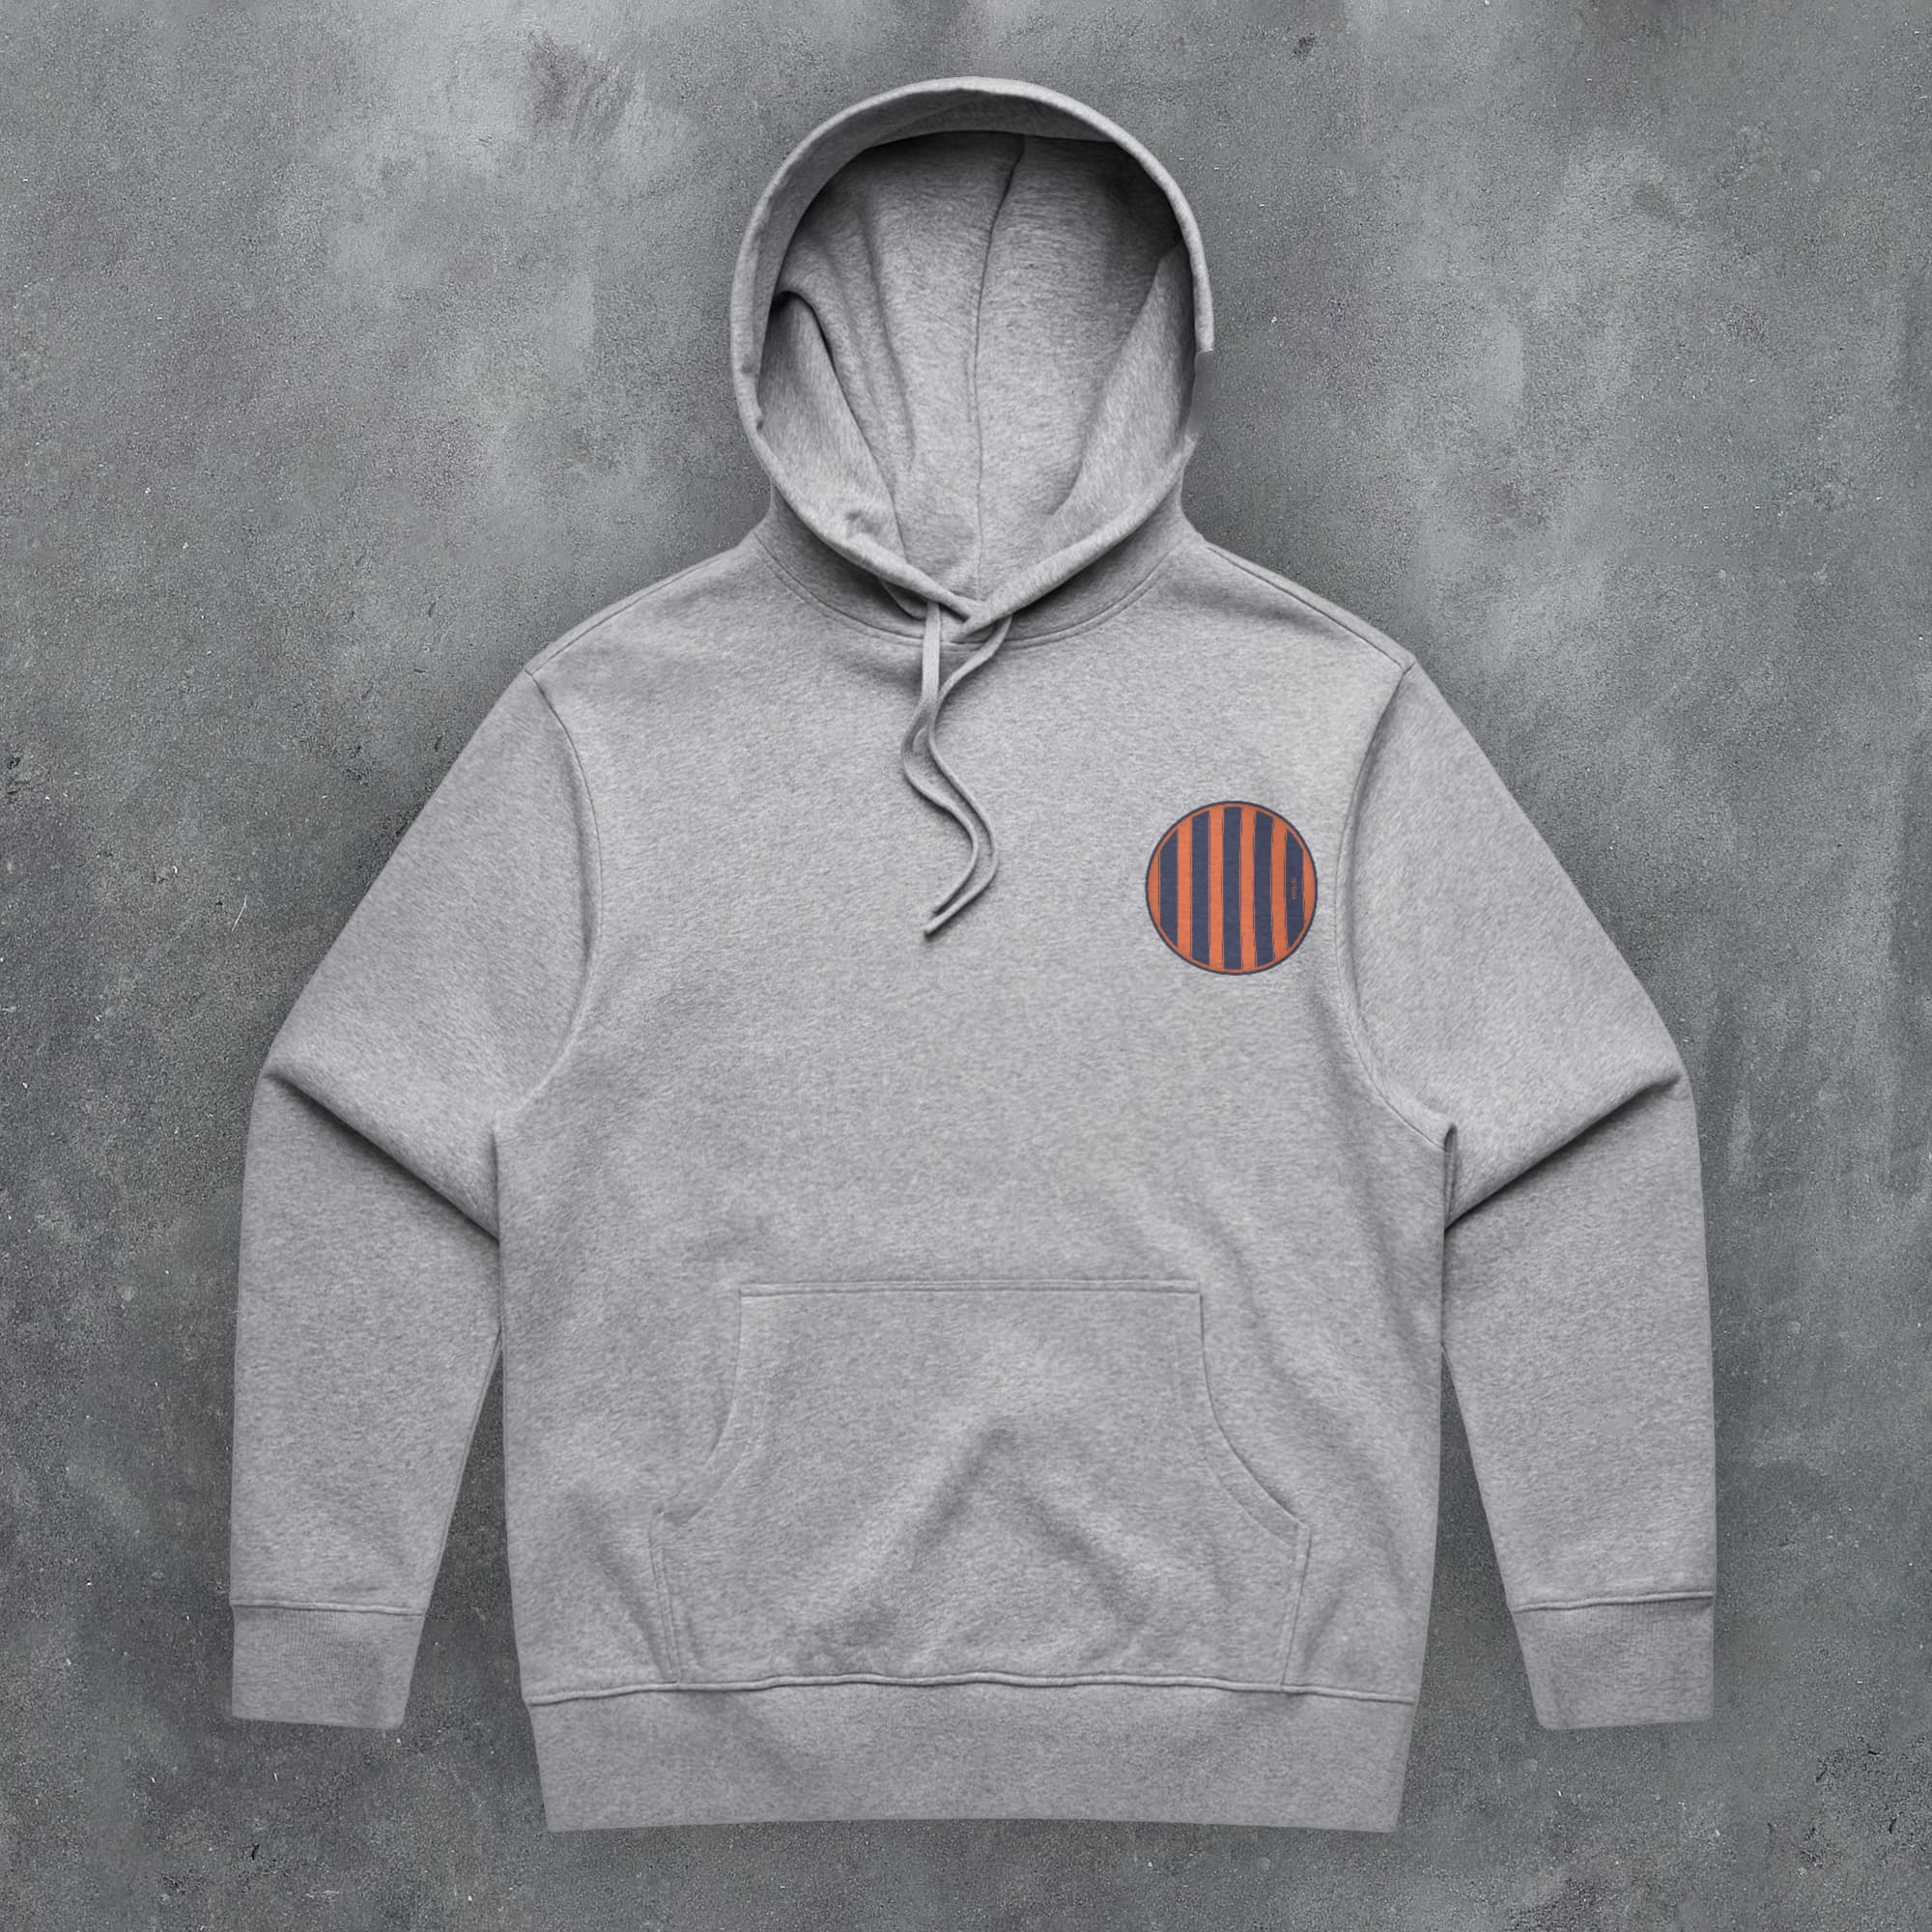 a grey hoodie with an orange stripe on the chest